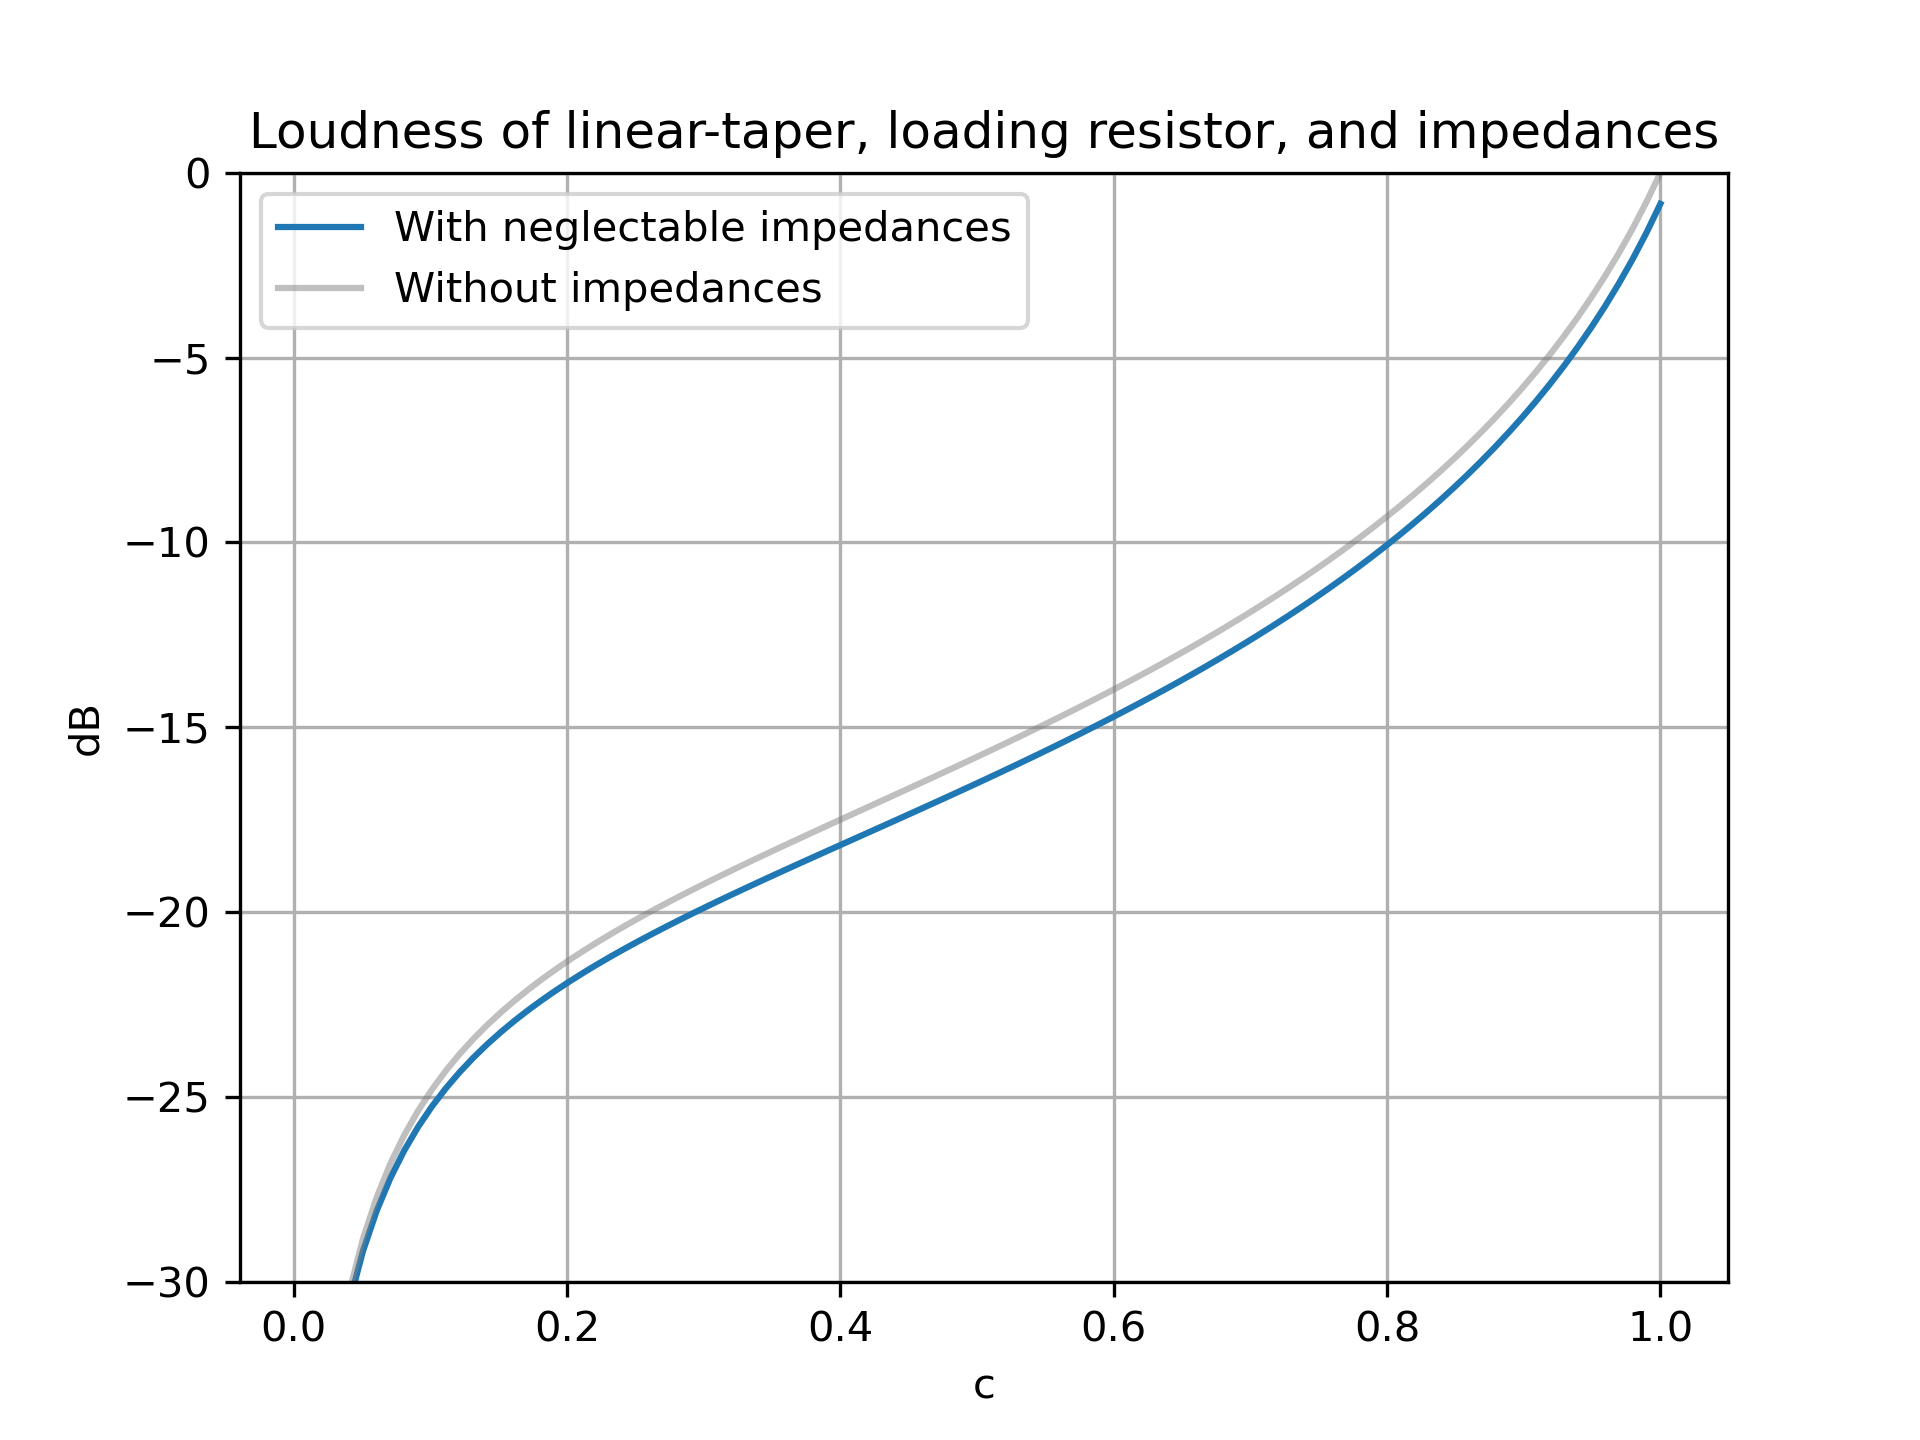 perceived loudness of linear taper and loading resistor and impedances in dB